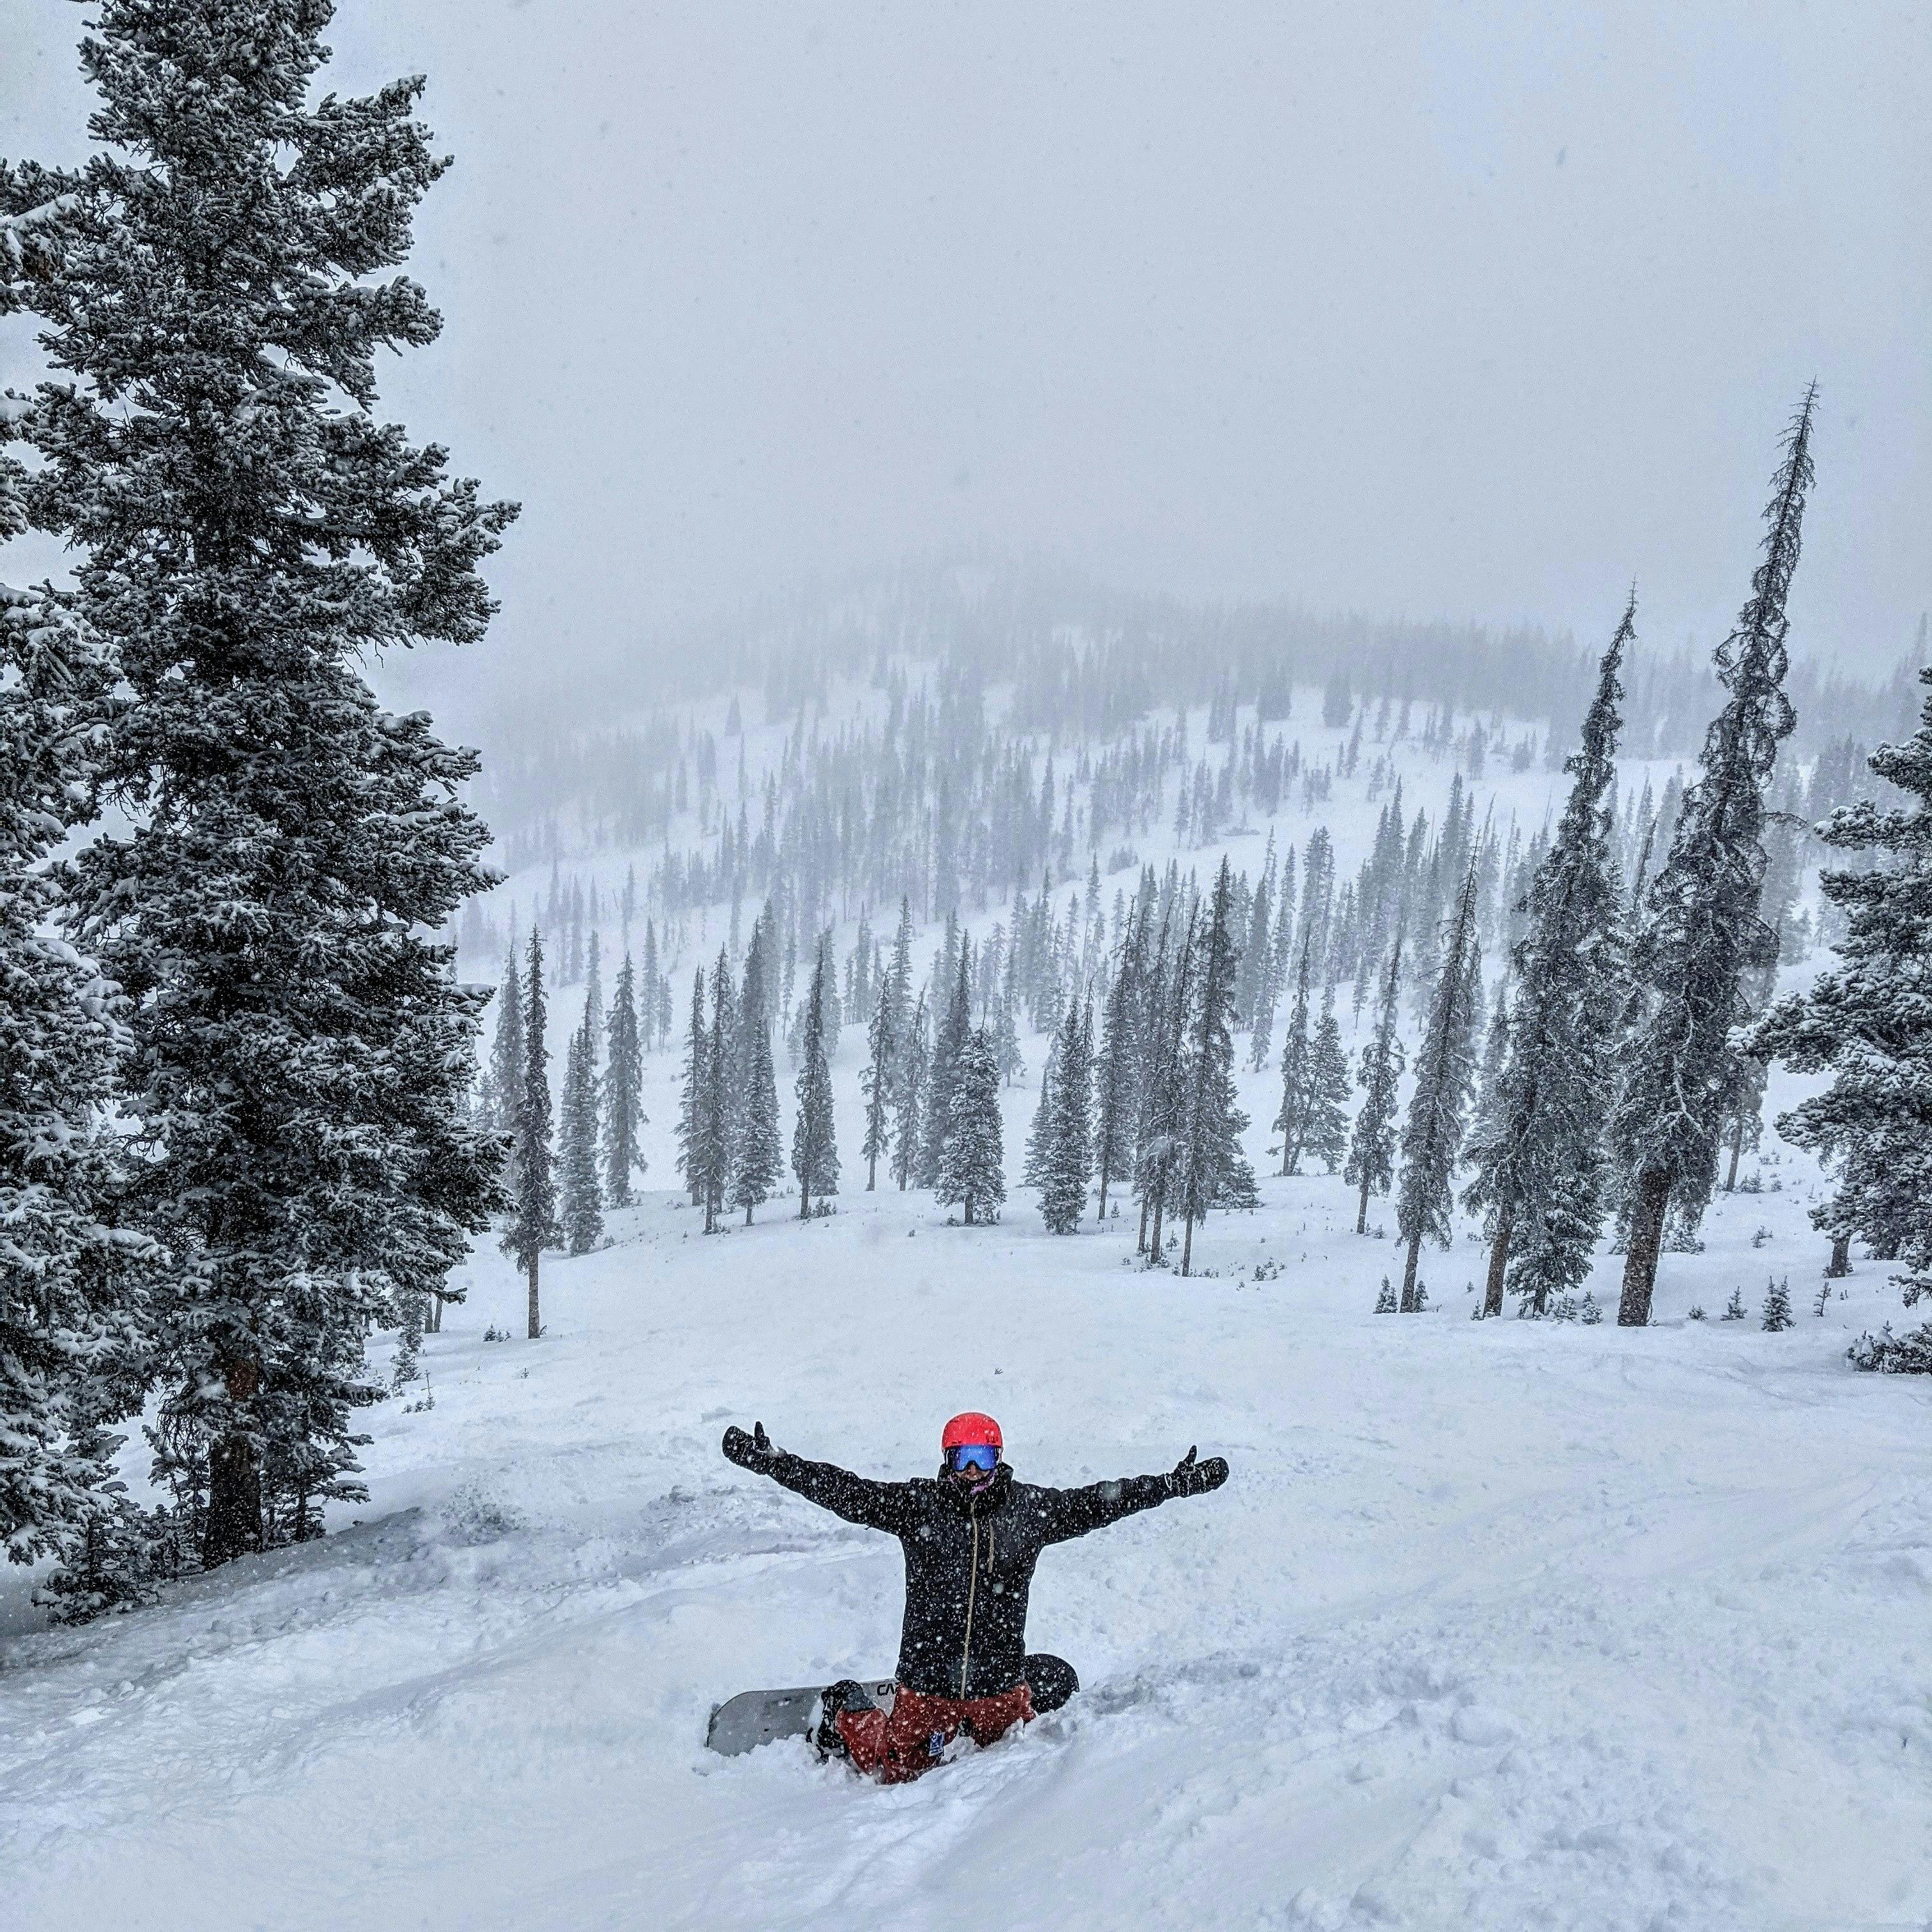 A snowboarder sitting in the middle of a snowy run with his arms outstretched. There are clouds in the background and it looks like it is snowing. 